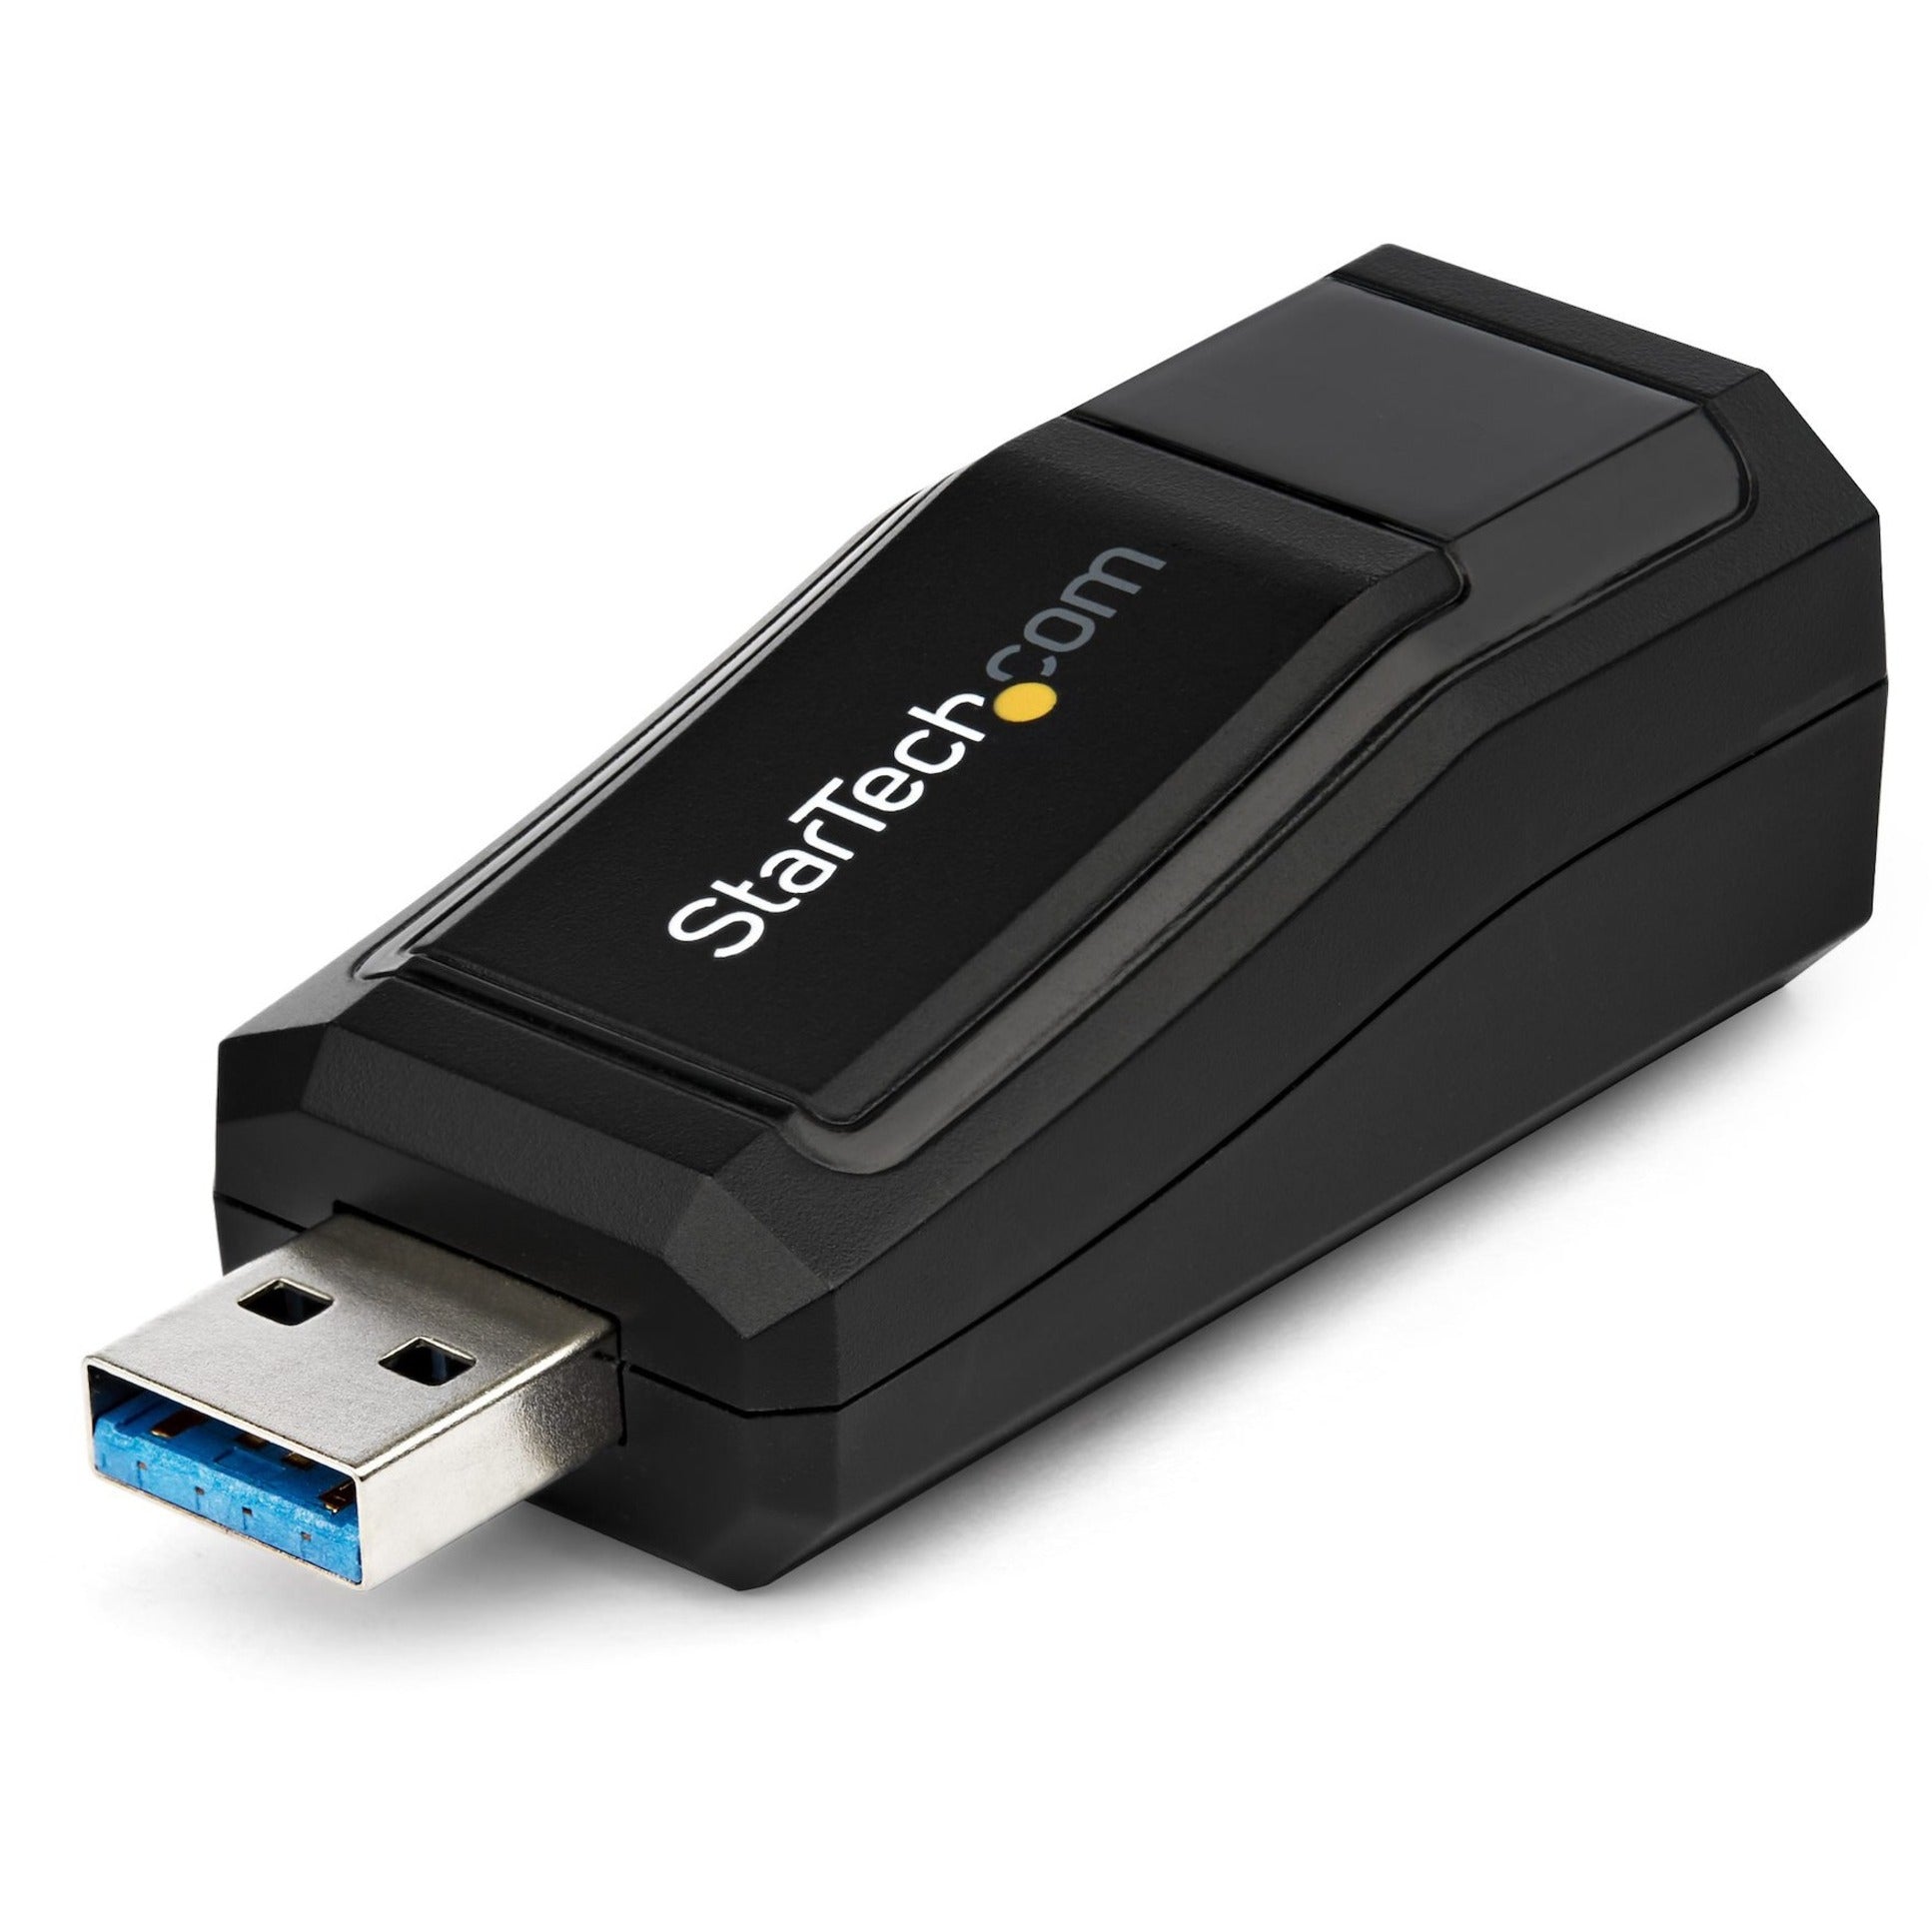 StarTech.com USB31000NDS USB 3.0 to Gigabit Ethernet NIC Network Adapter 10/100/1000 Mbps, High-Speed Internet Connection for PC